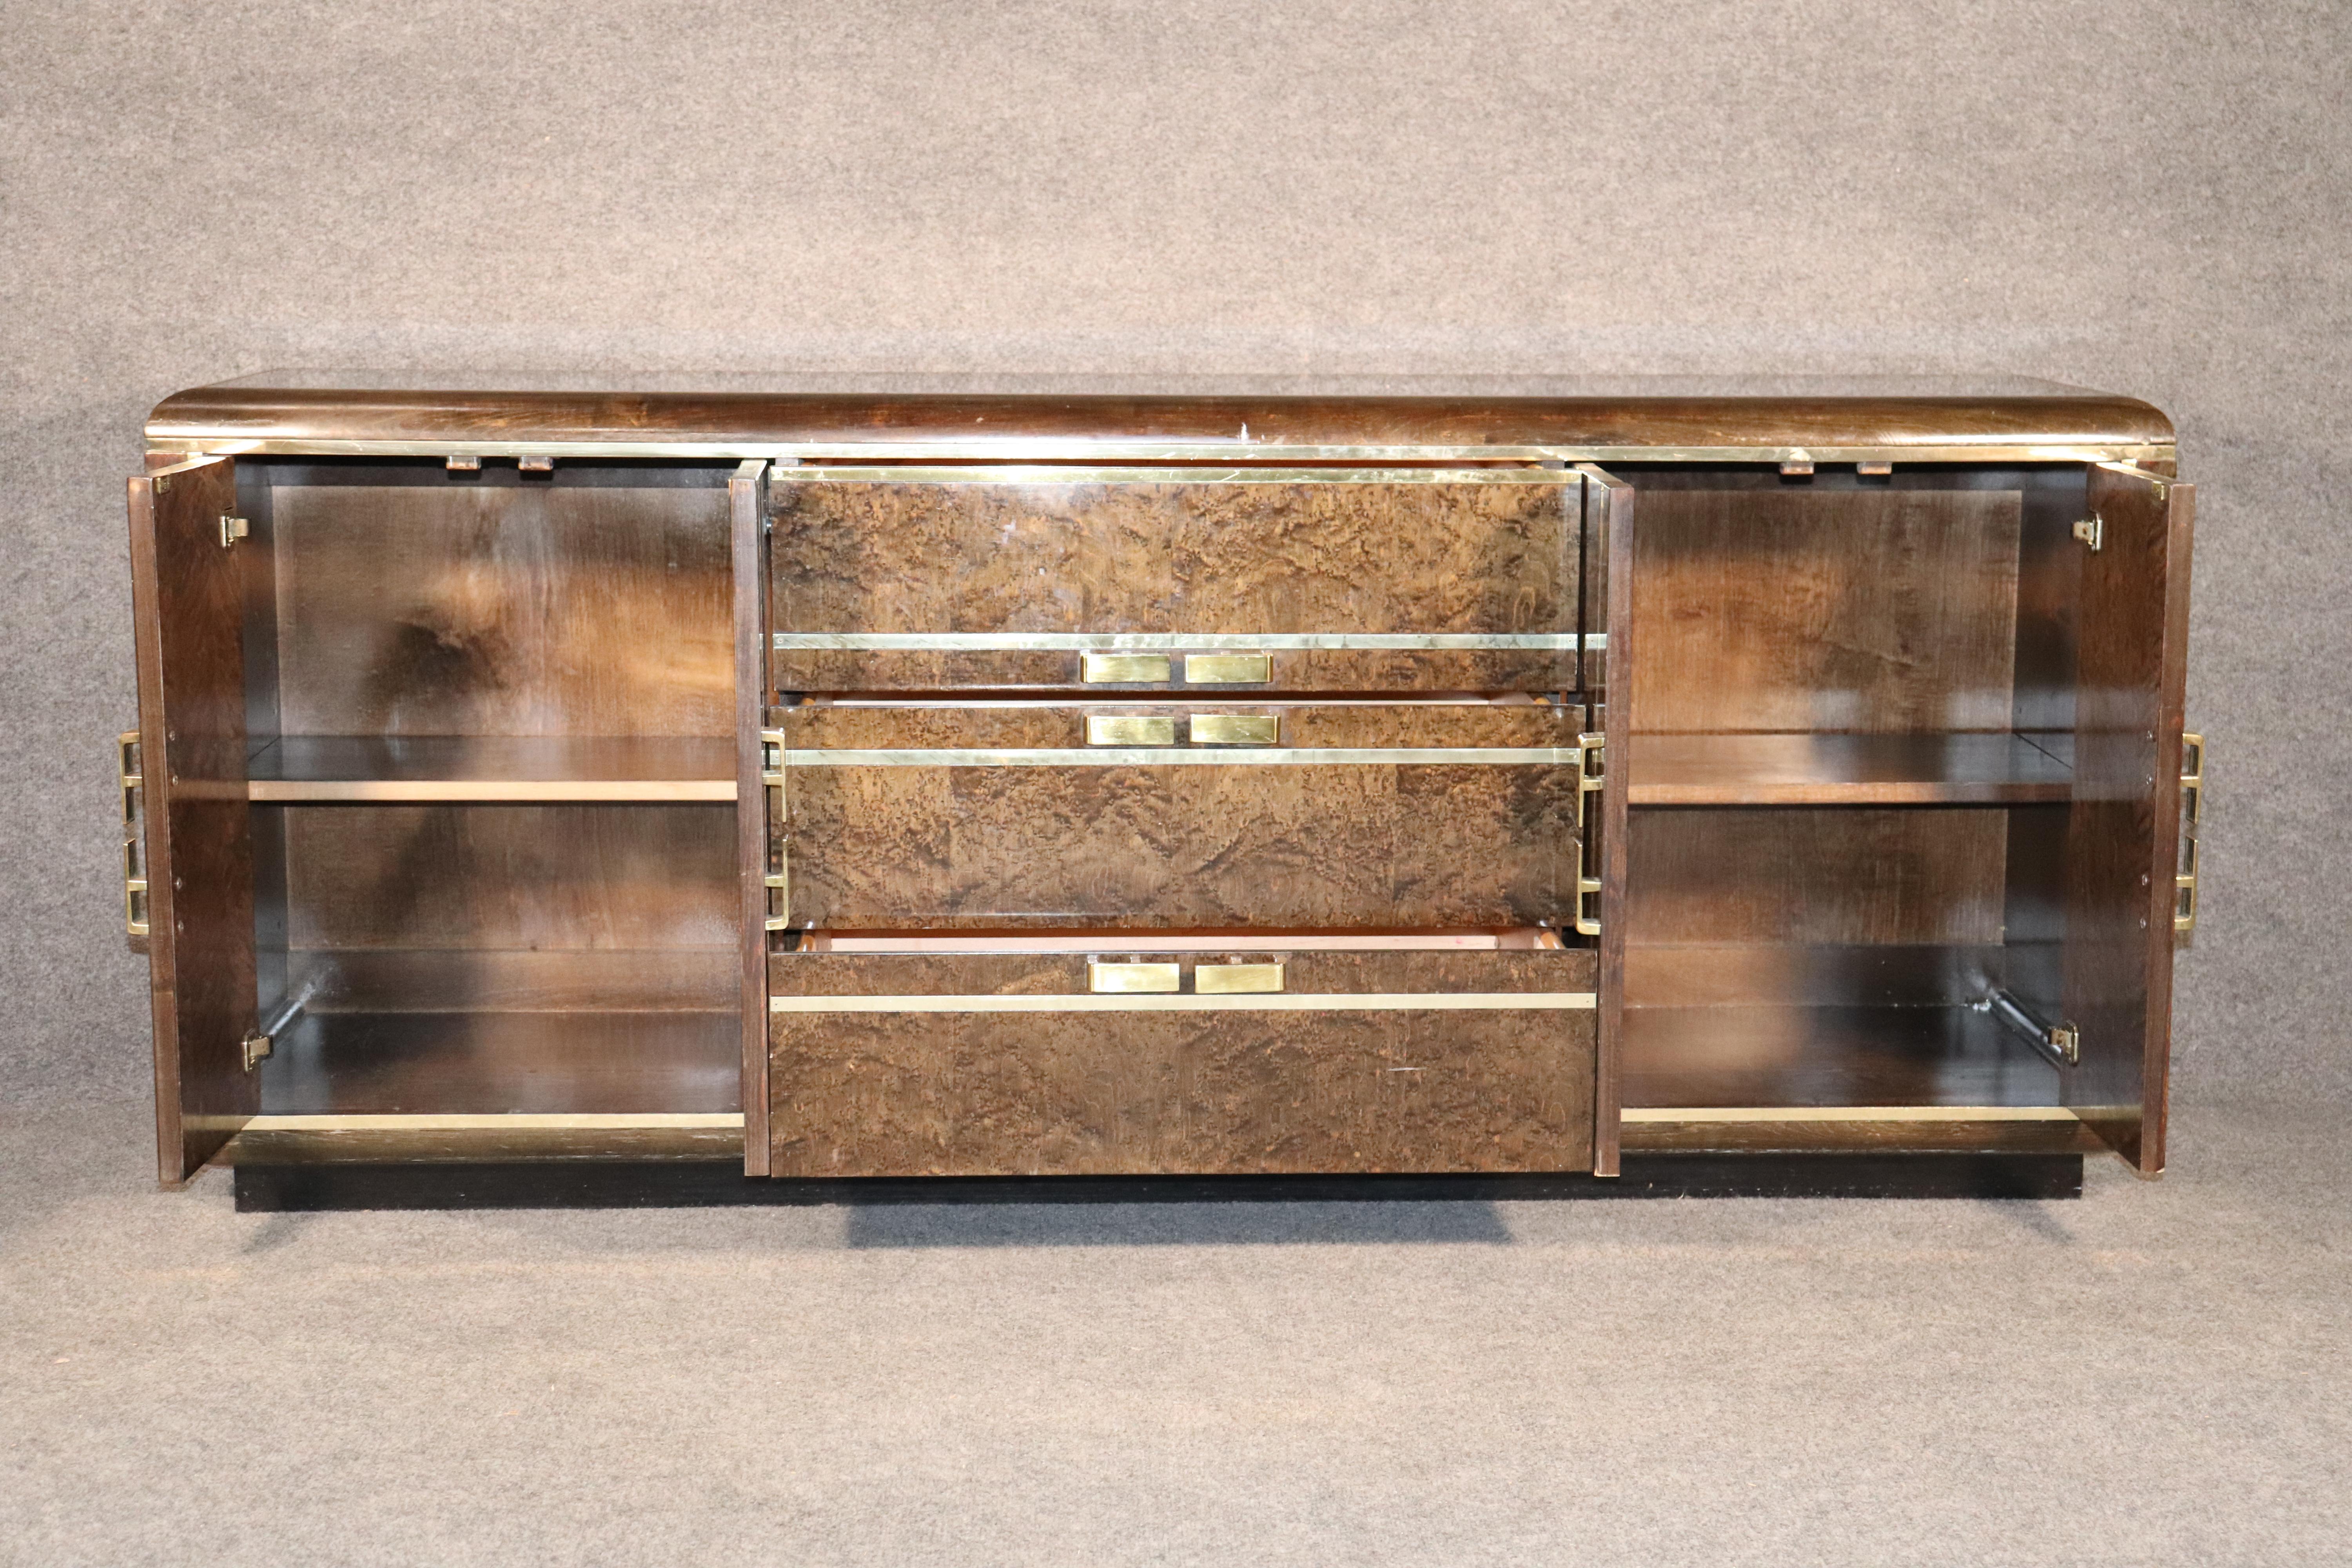 Long dresser in deep burl veneer with accenting brass trim and hardware. Three wide drawers and two side cabinets give ample storage.
Please confirm location.